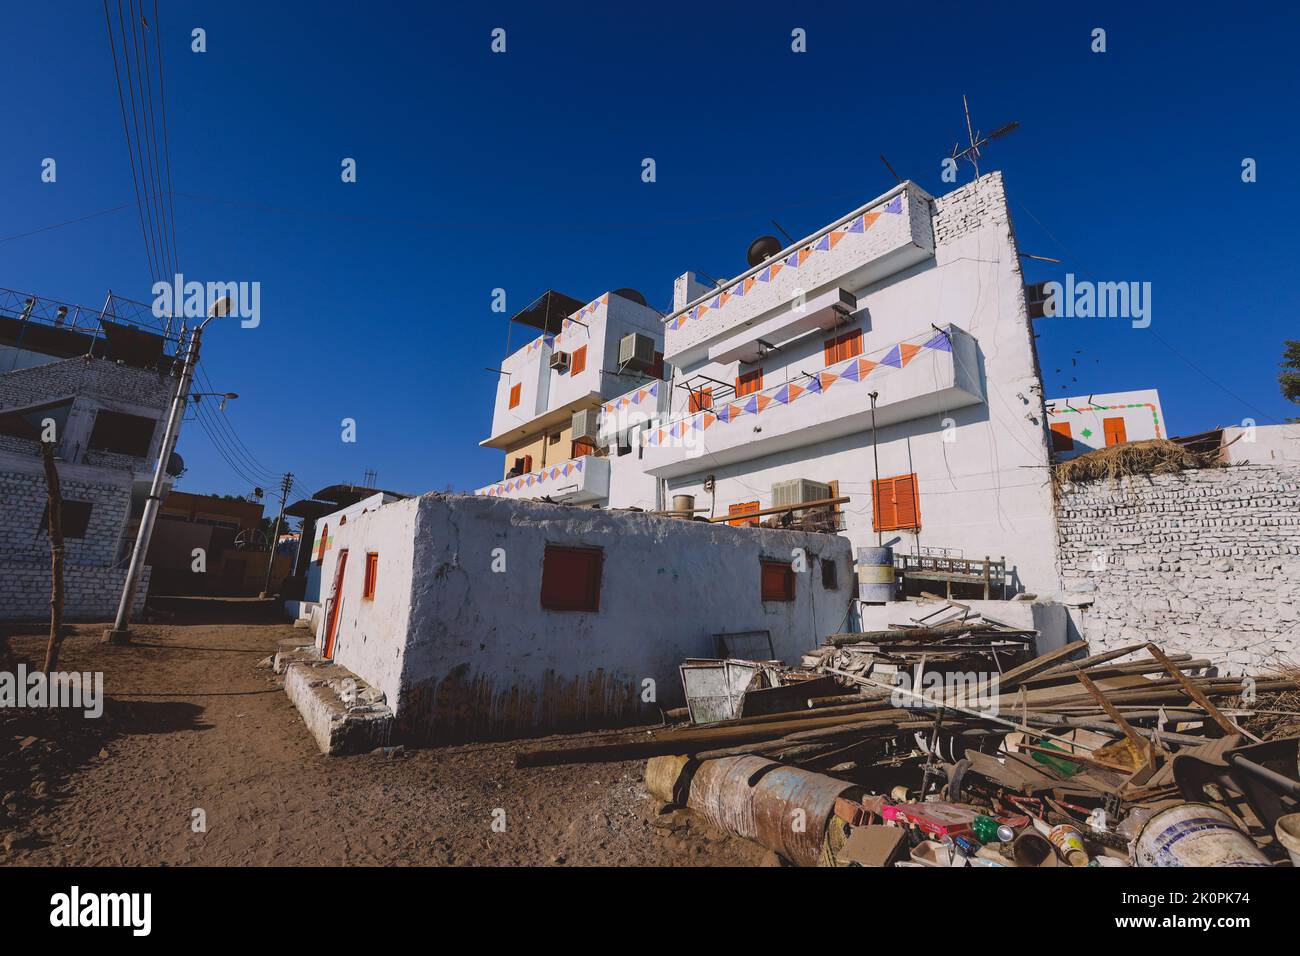 Colorful Buildings in Aswan with Local Nubian Style Decoration on the Walls, Egypt Stock Photo